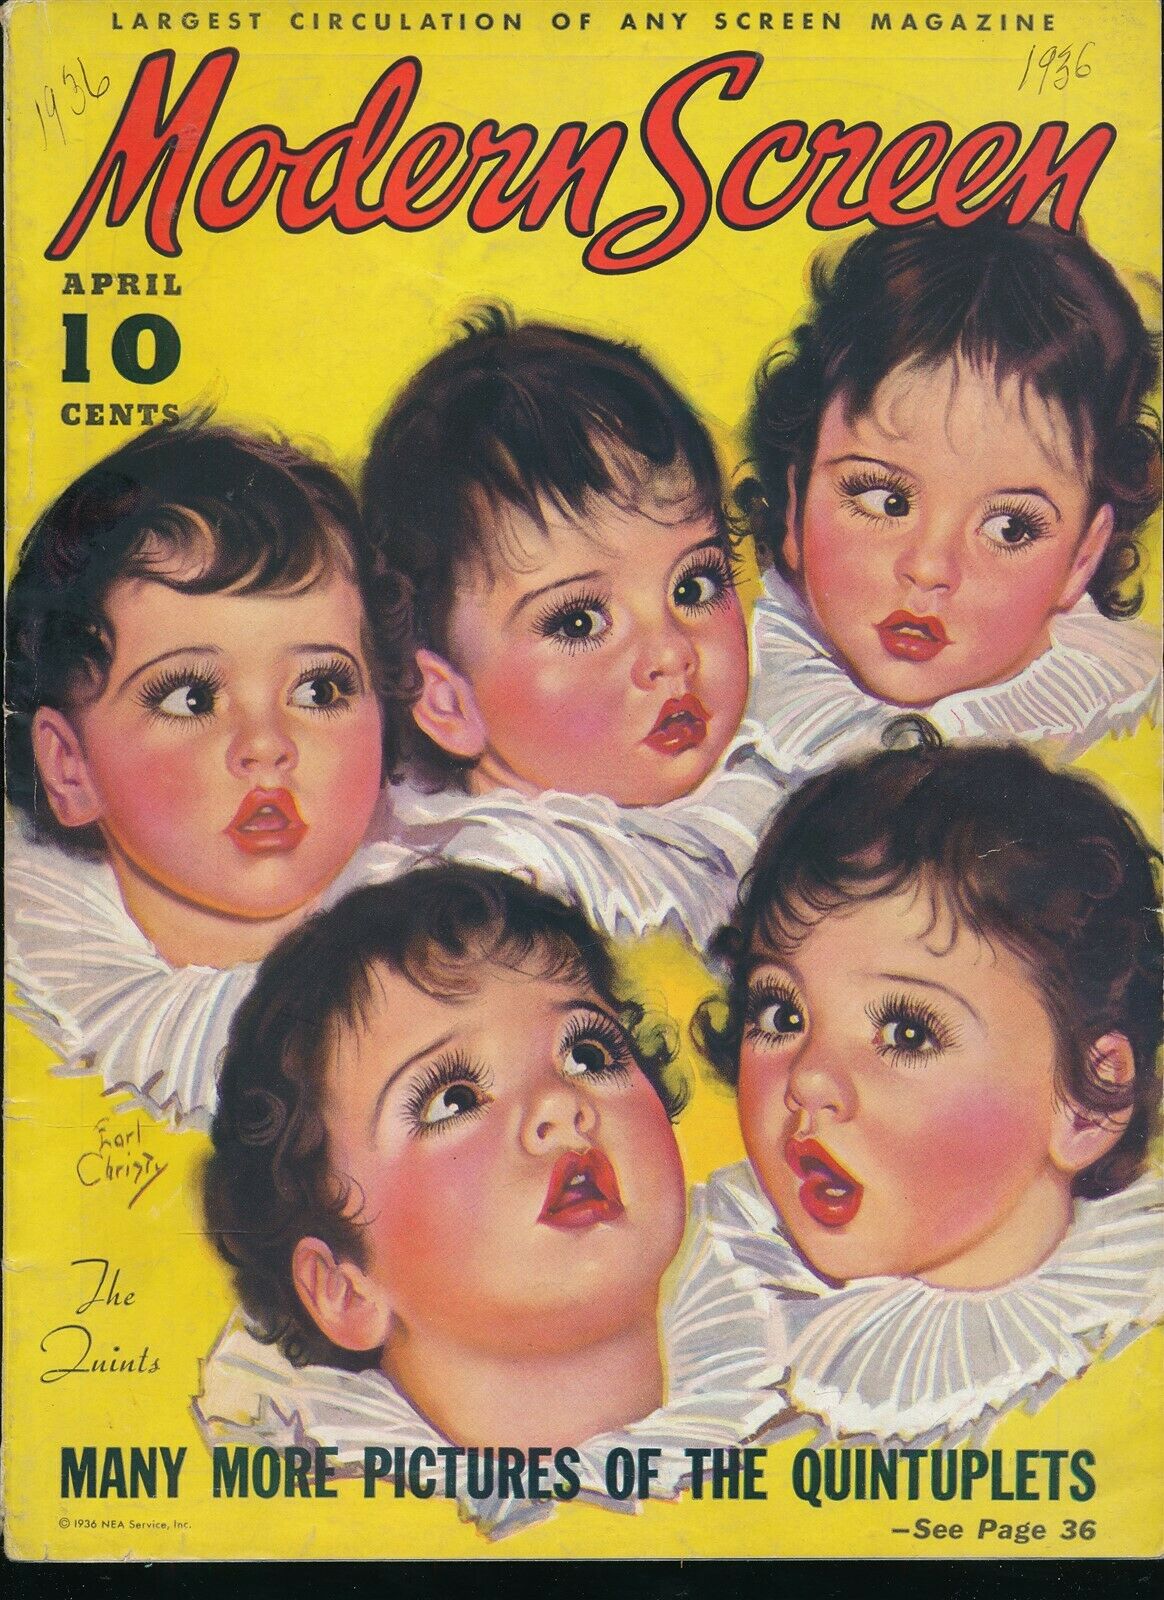 Dionne Quintuplets Earl Christy Painted Cover April 1936 Modern Screen Magazine